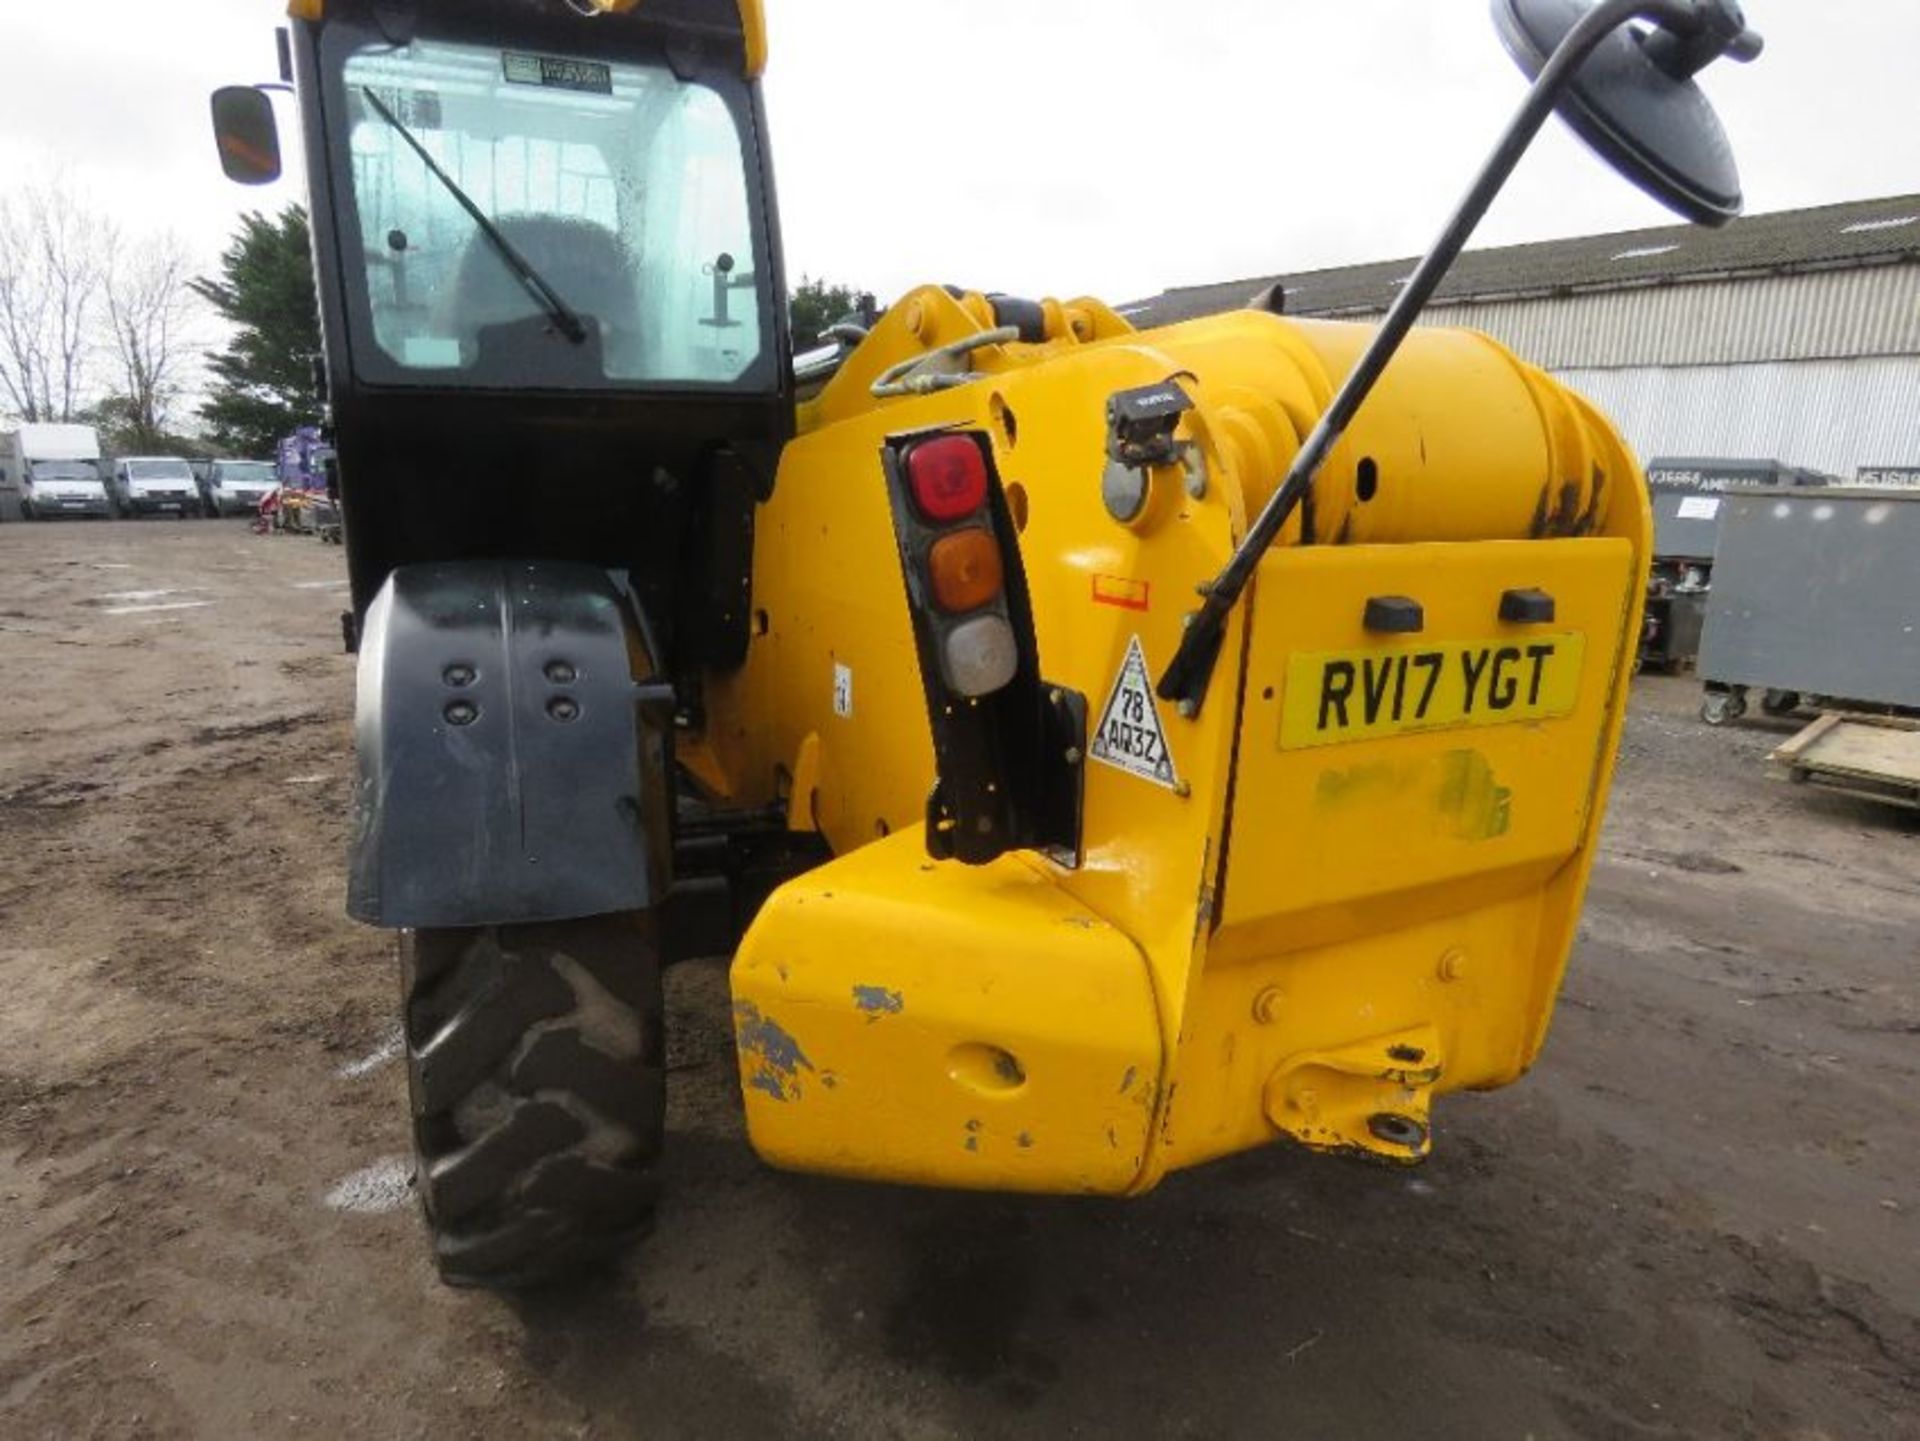 JCB 540-140 TELEHANDLER REG:RV17 YGT WITH V5. 14METRE REACH, 4 TONNE LIFT OWNED FROM NEW BY THE COMP - Image 19 of 23